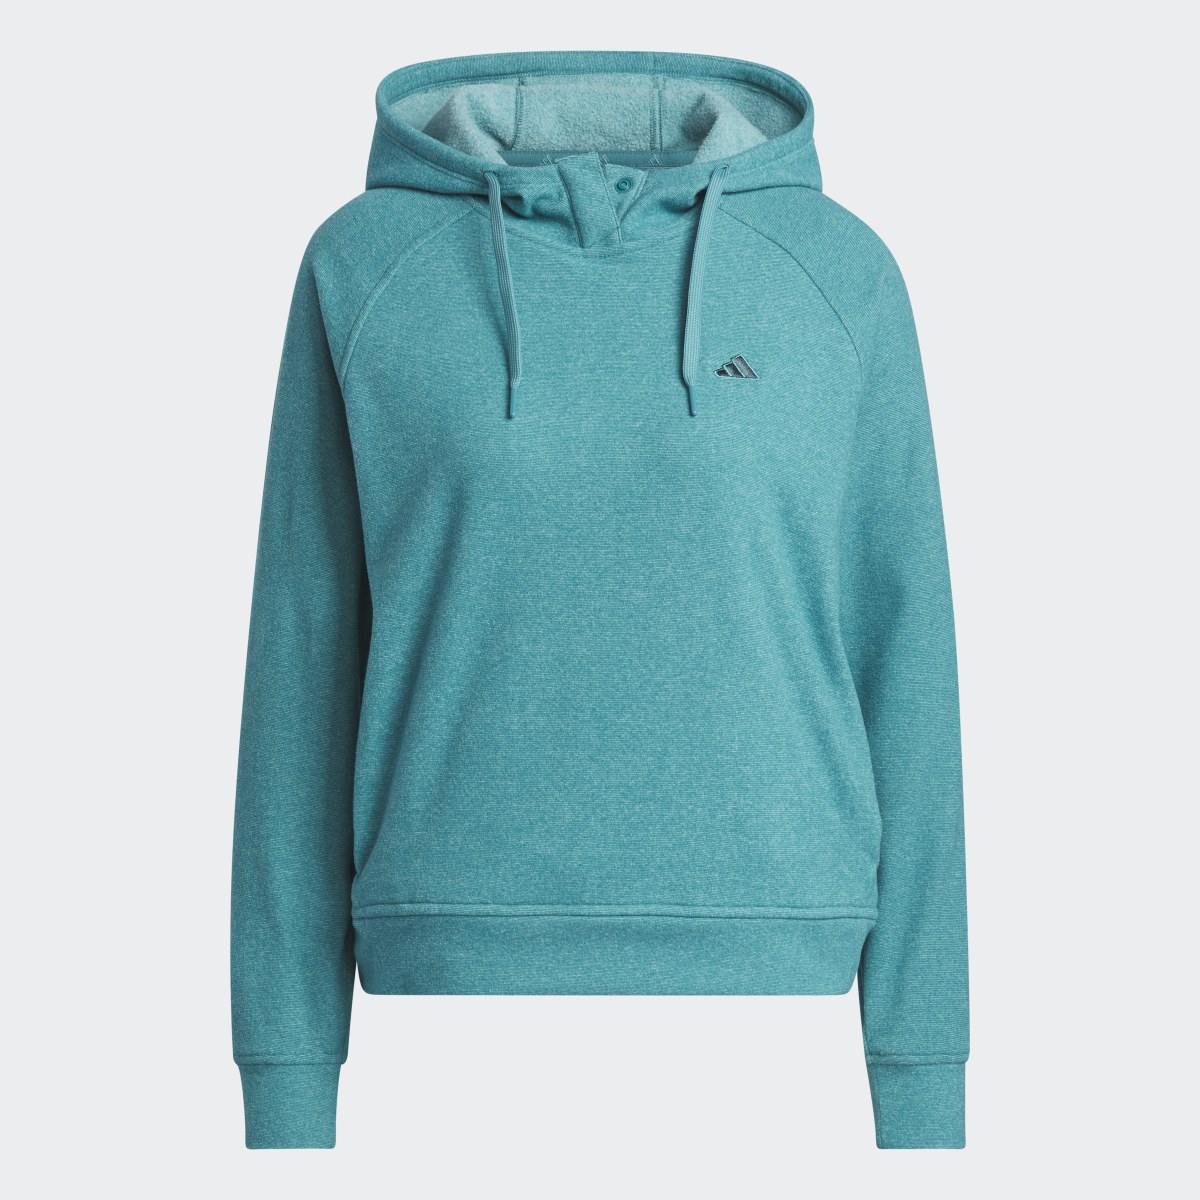 Adidas Go-To Hoodie. 5